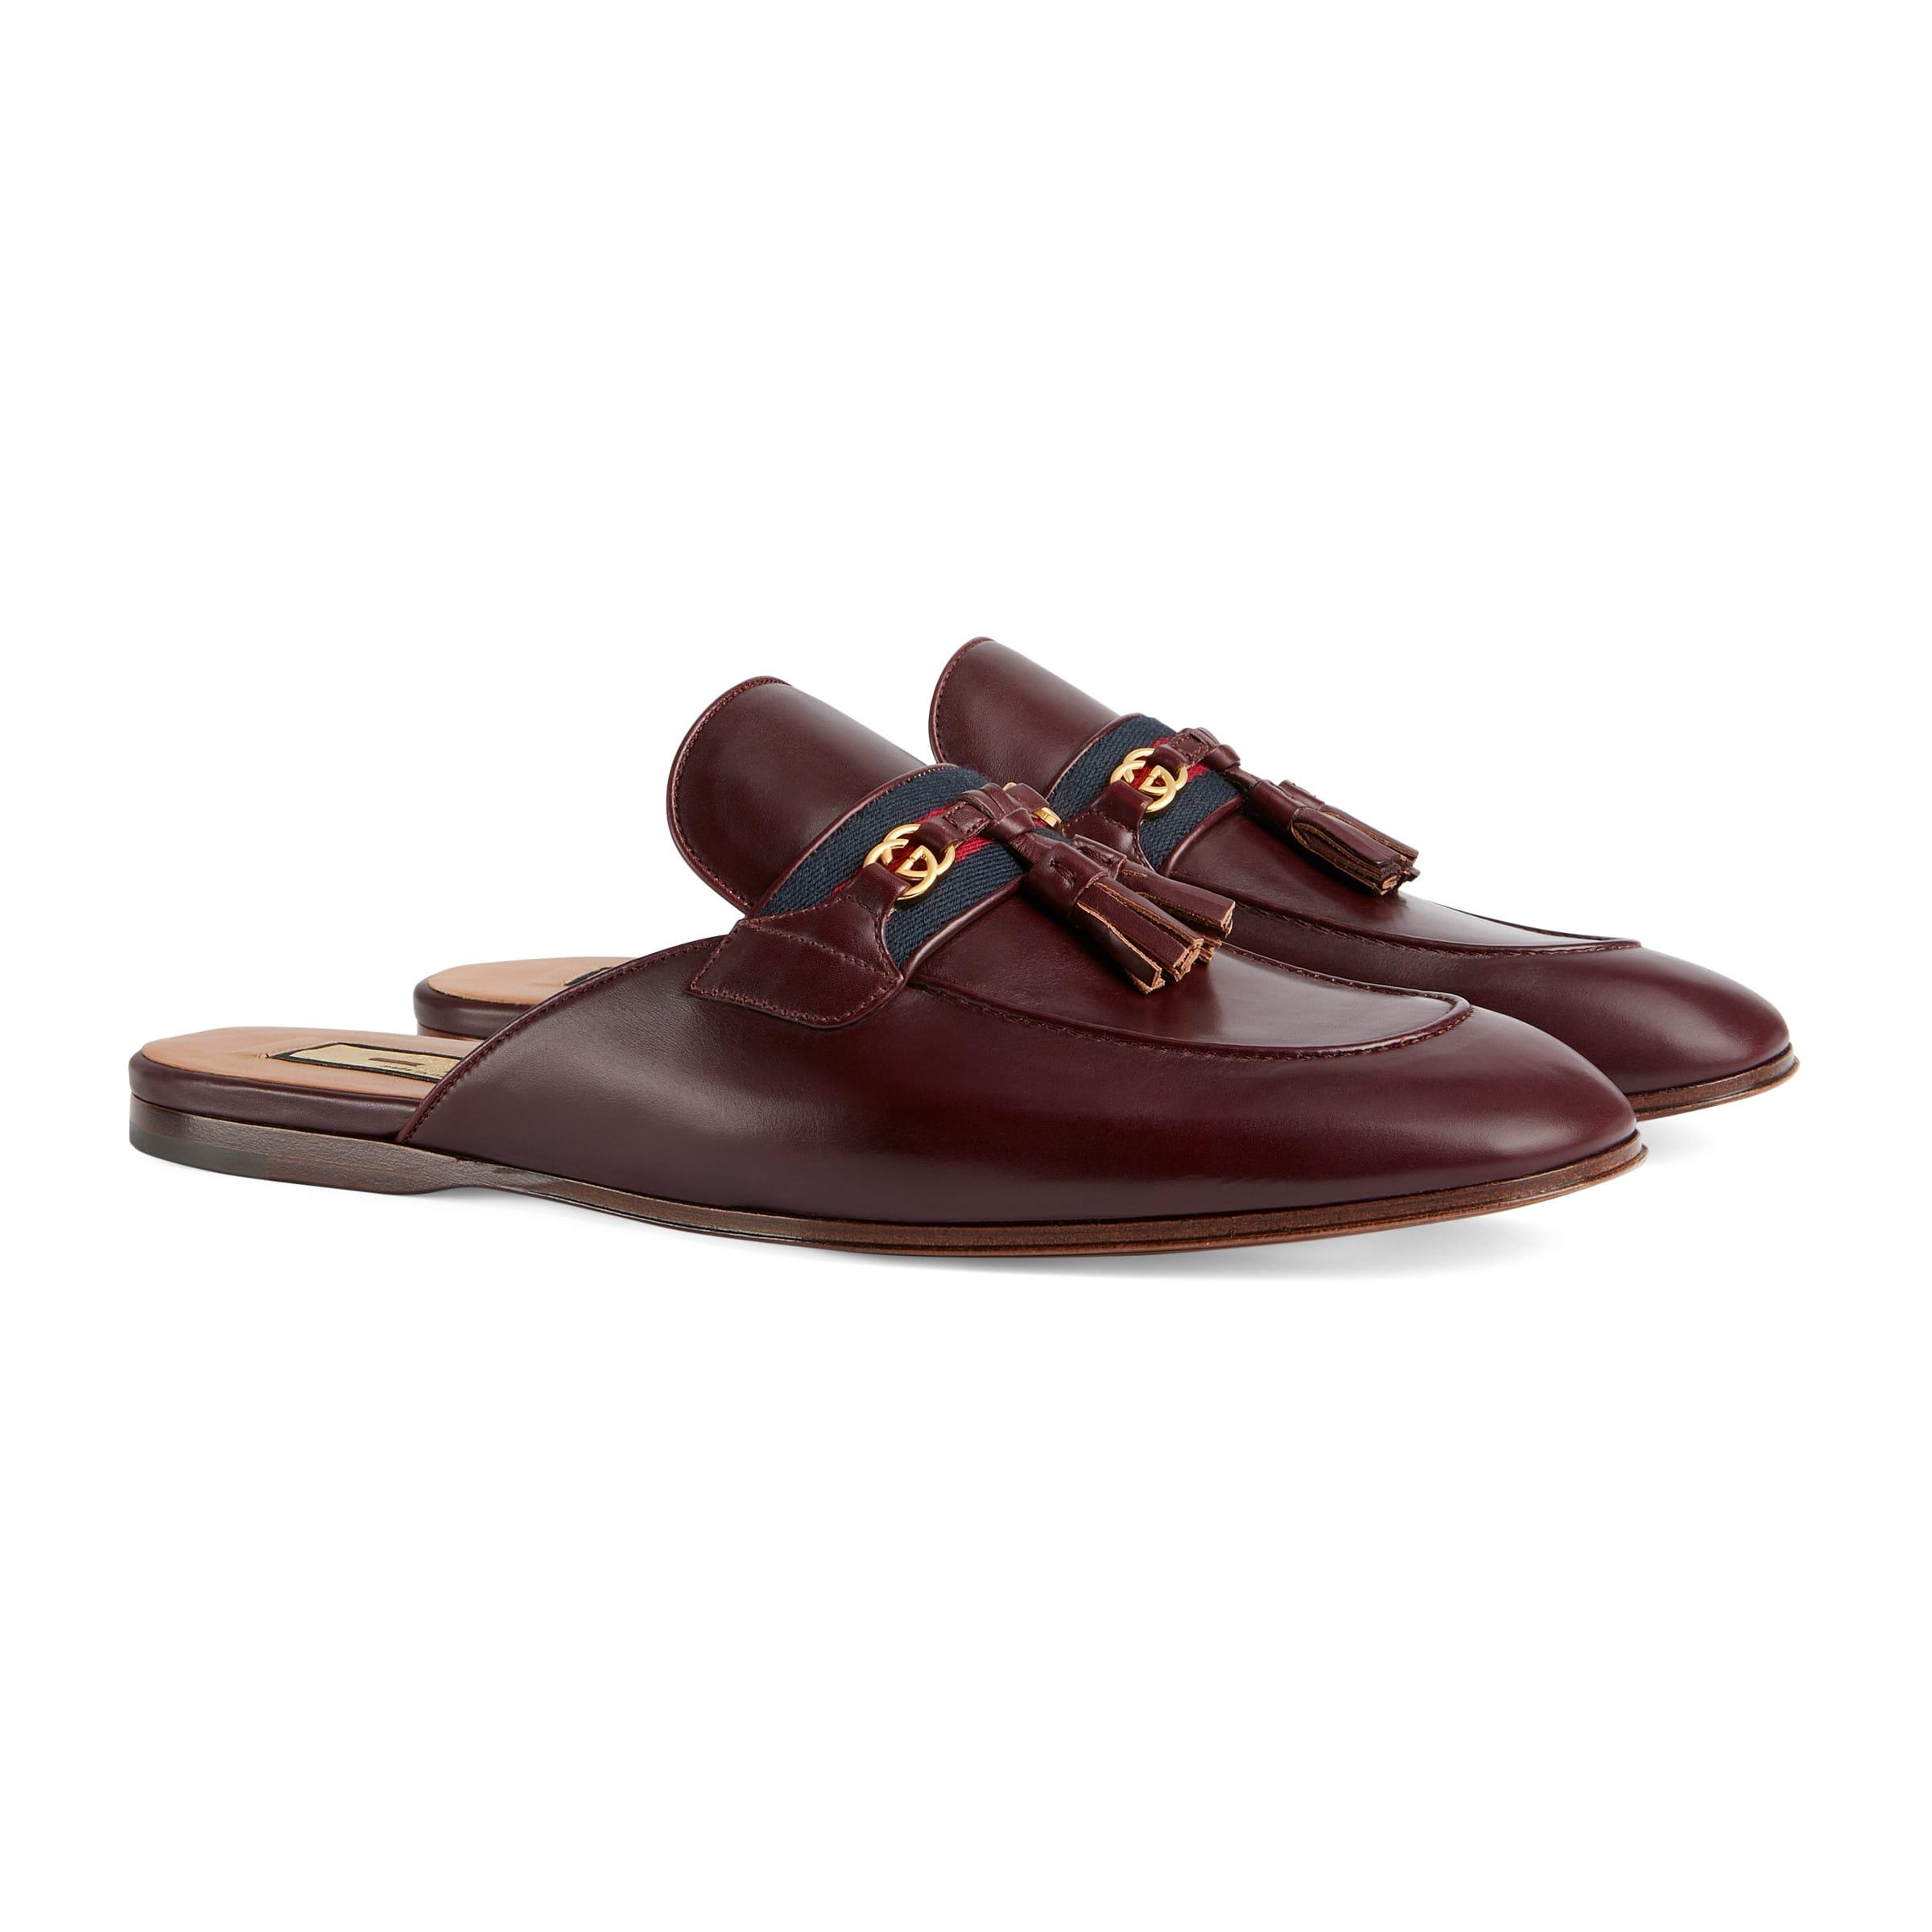 Gucci Flip Flops in Surulere - Shoes, Brothersman Luxury